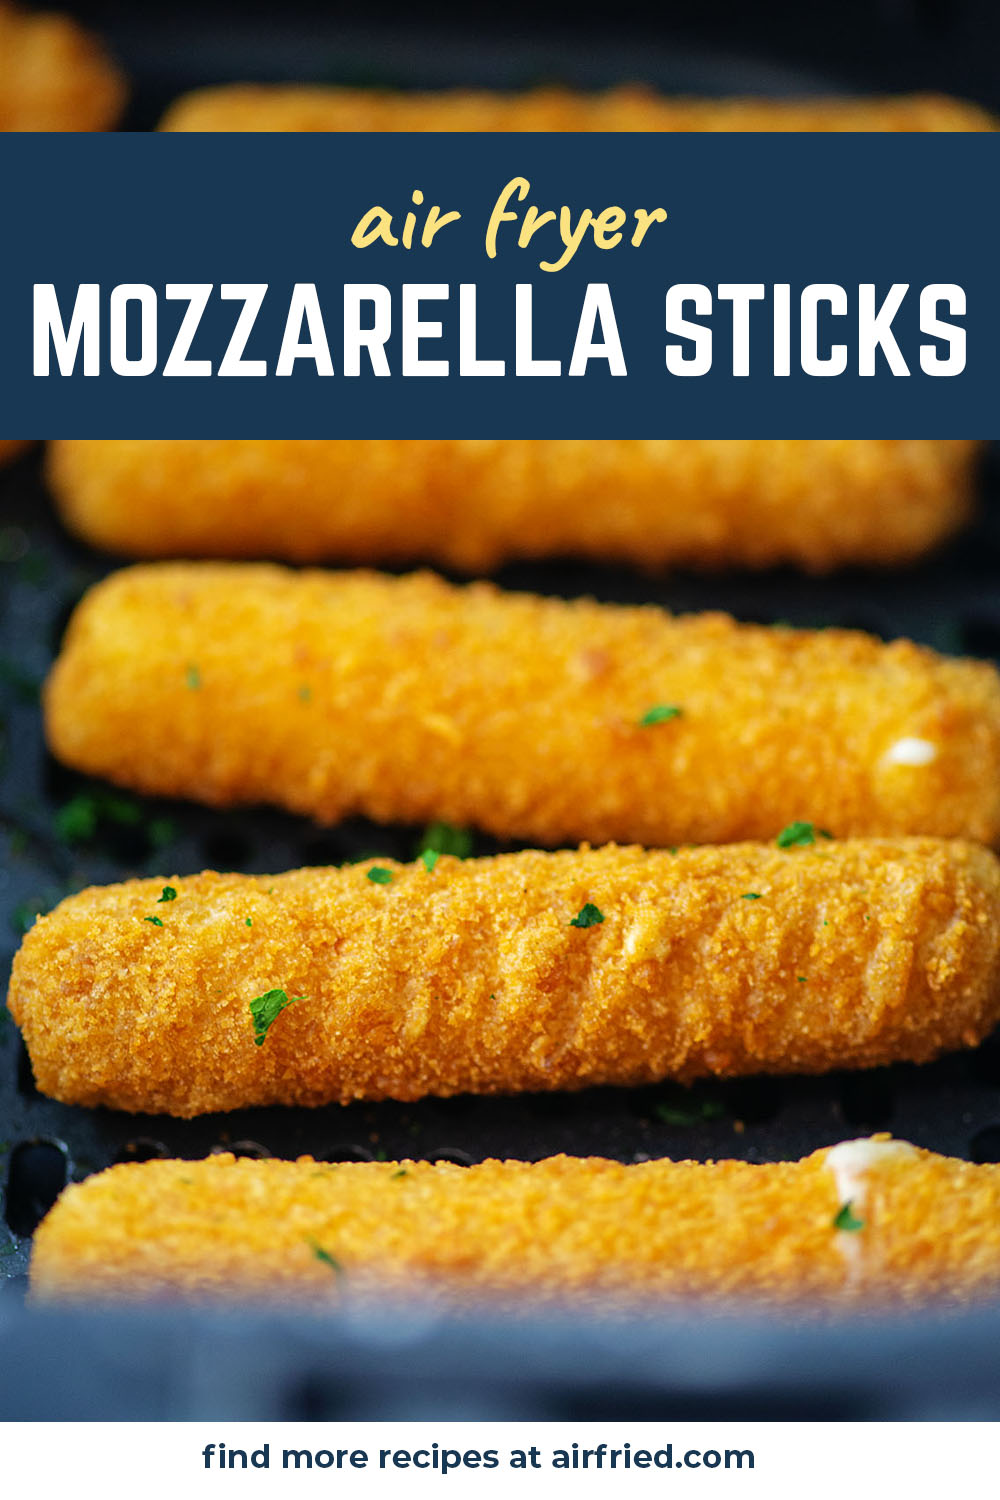 Air frying your frozen cheese sticks only takes about 5 minutes and you get a crispy coating with super stringy mozzarella cheese in the middle!